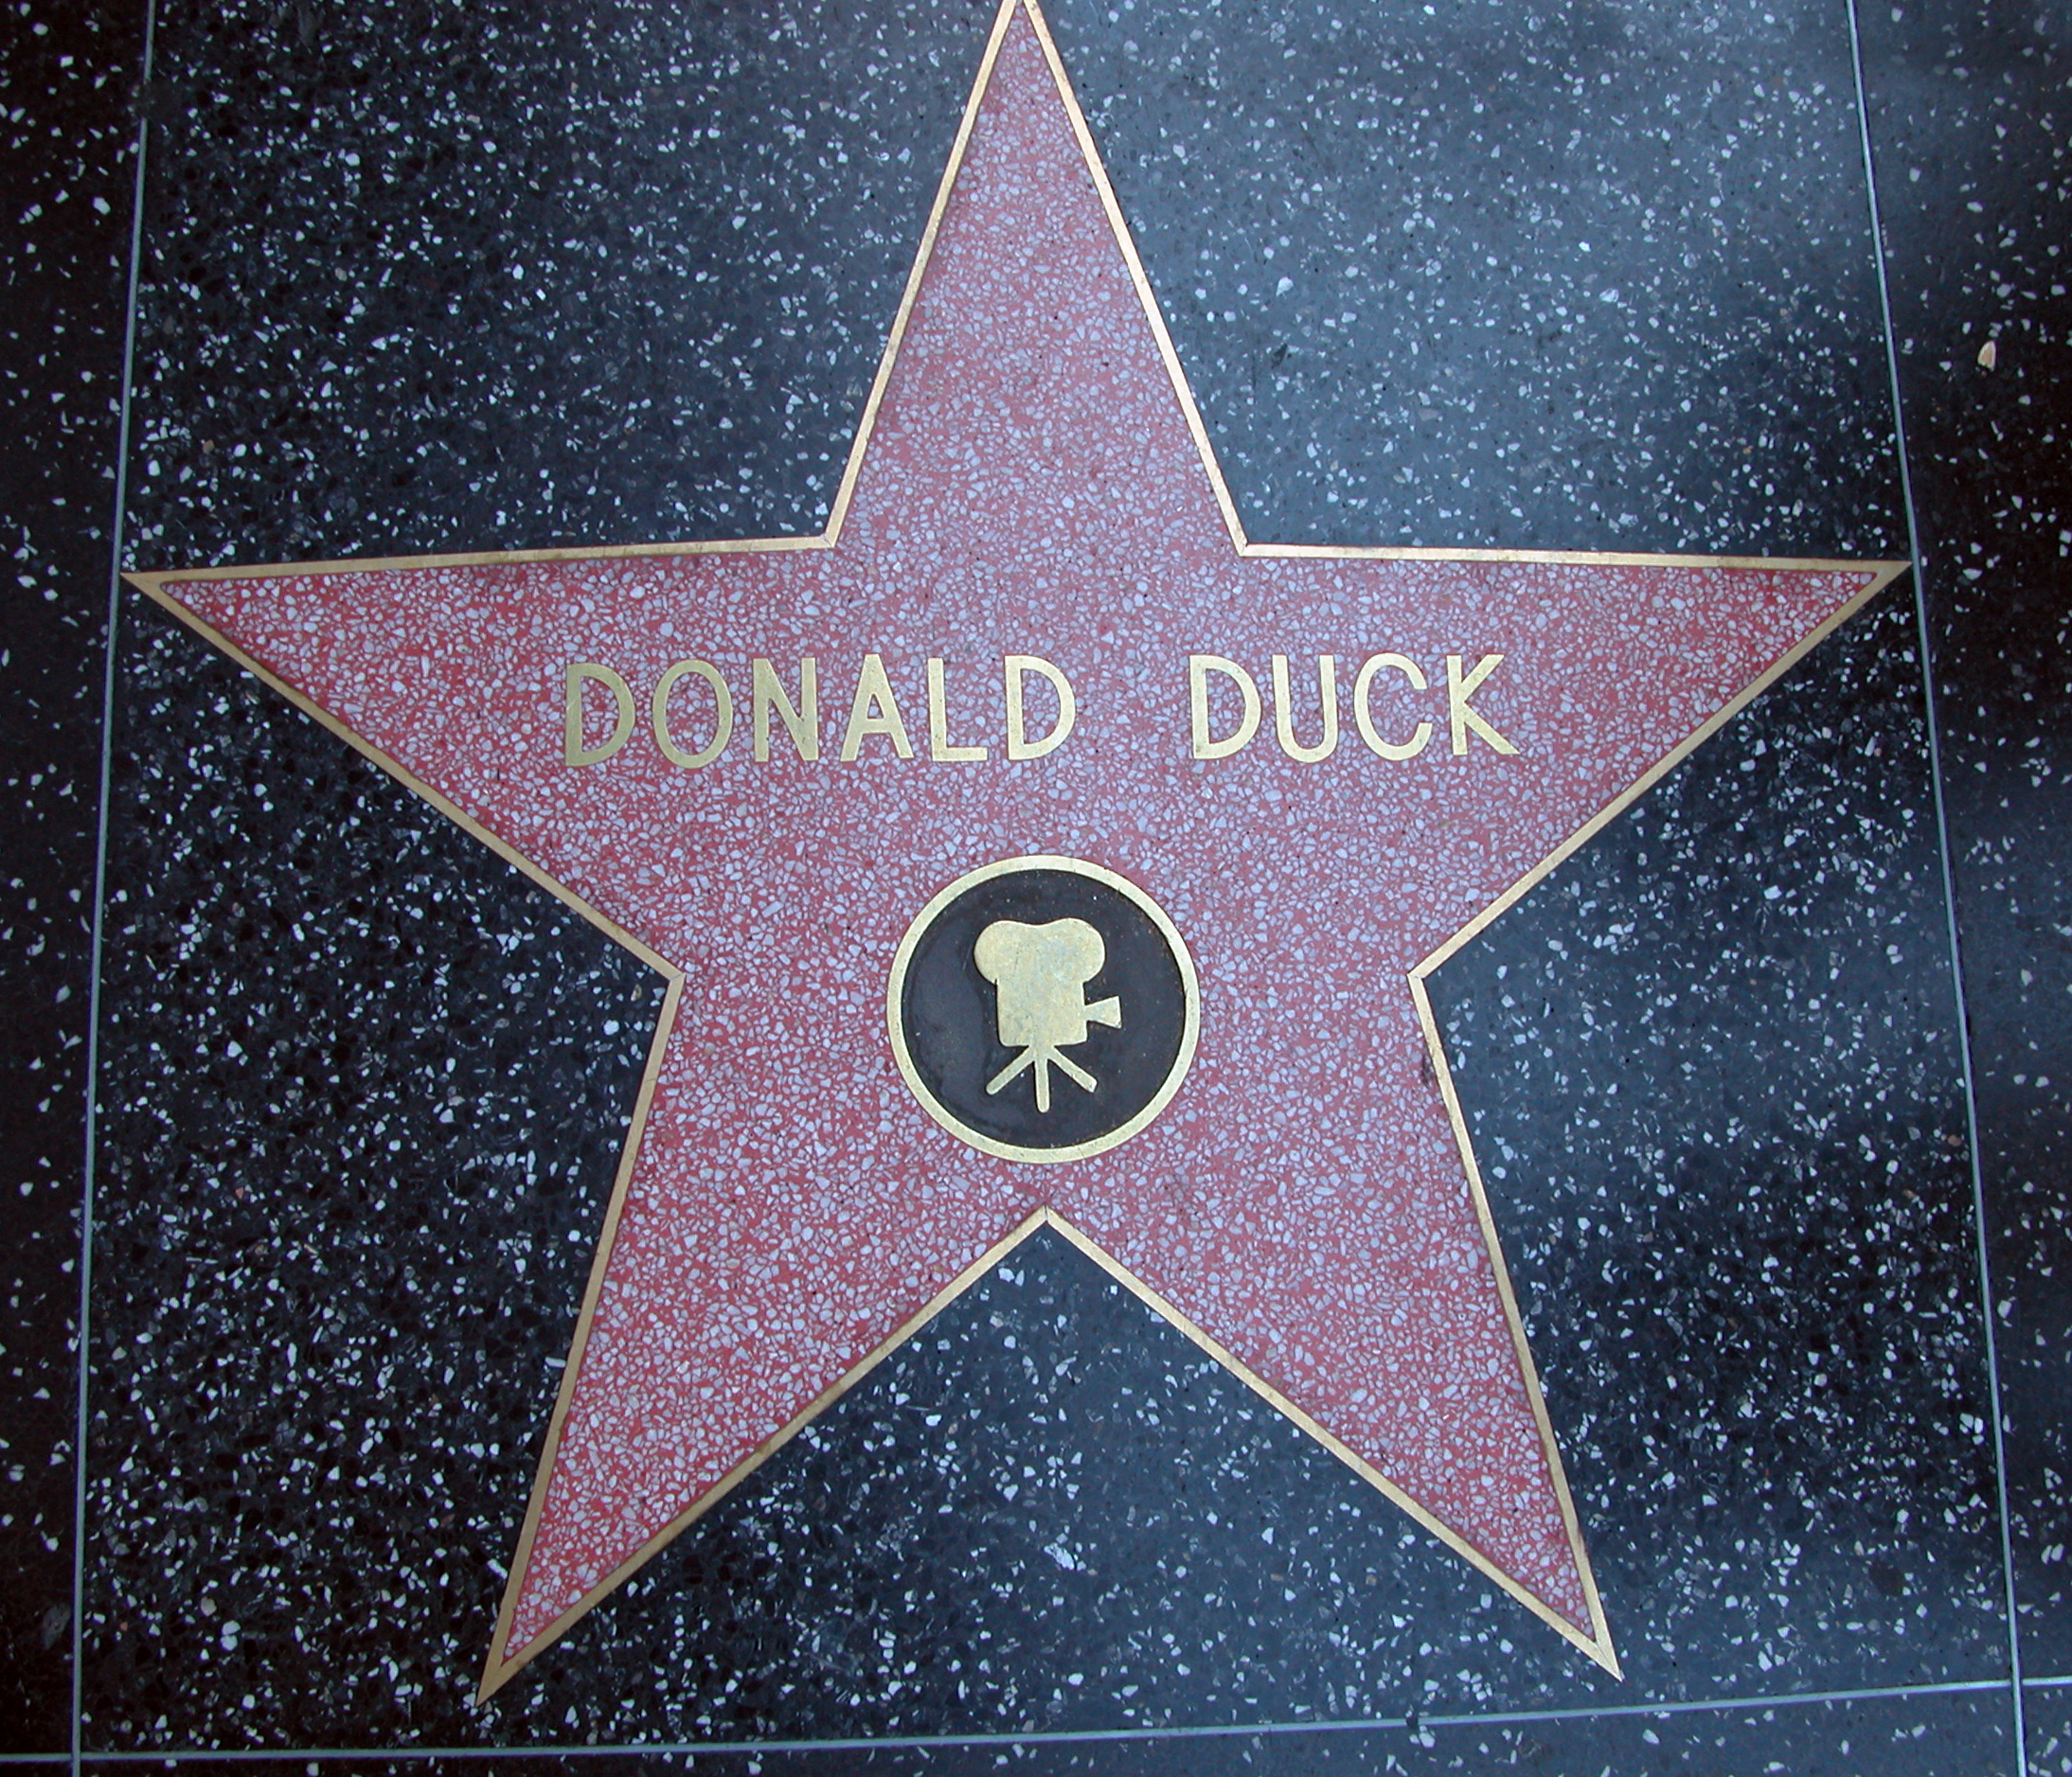 Donald duck star on walk on fame